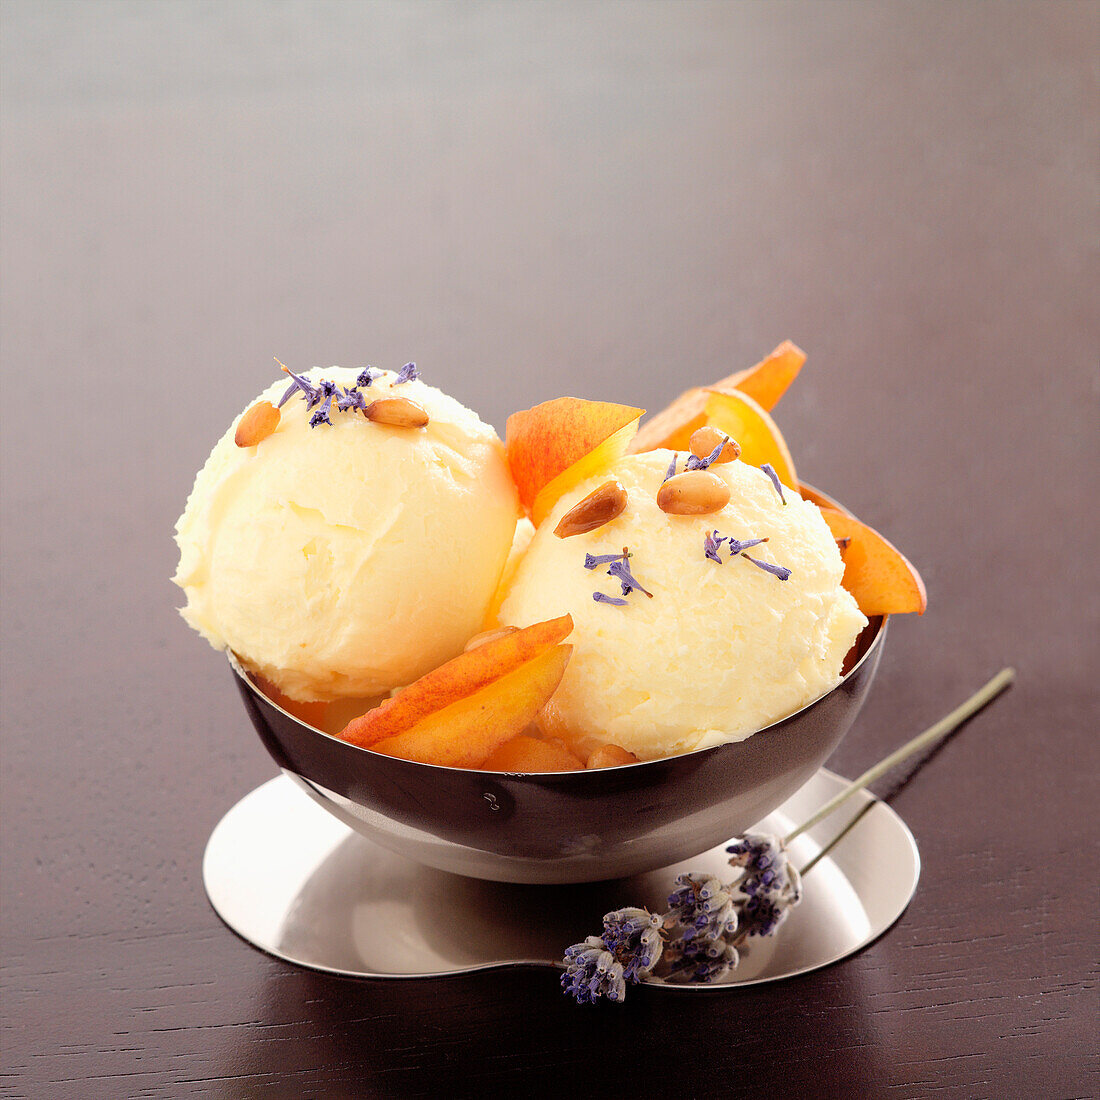 Peach sorbet with pine nuts and lavander